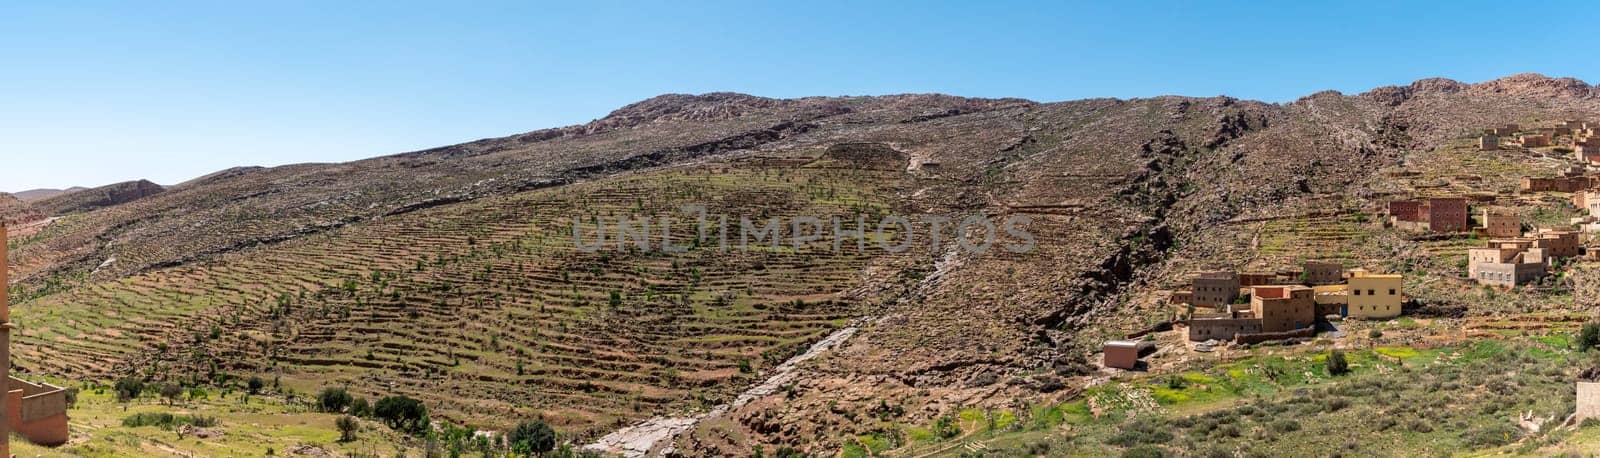 Great panoramic landscape of terrace cultivation in the Anti-Atlas mountains, Taourirt region in Morocco